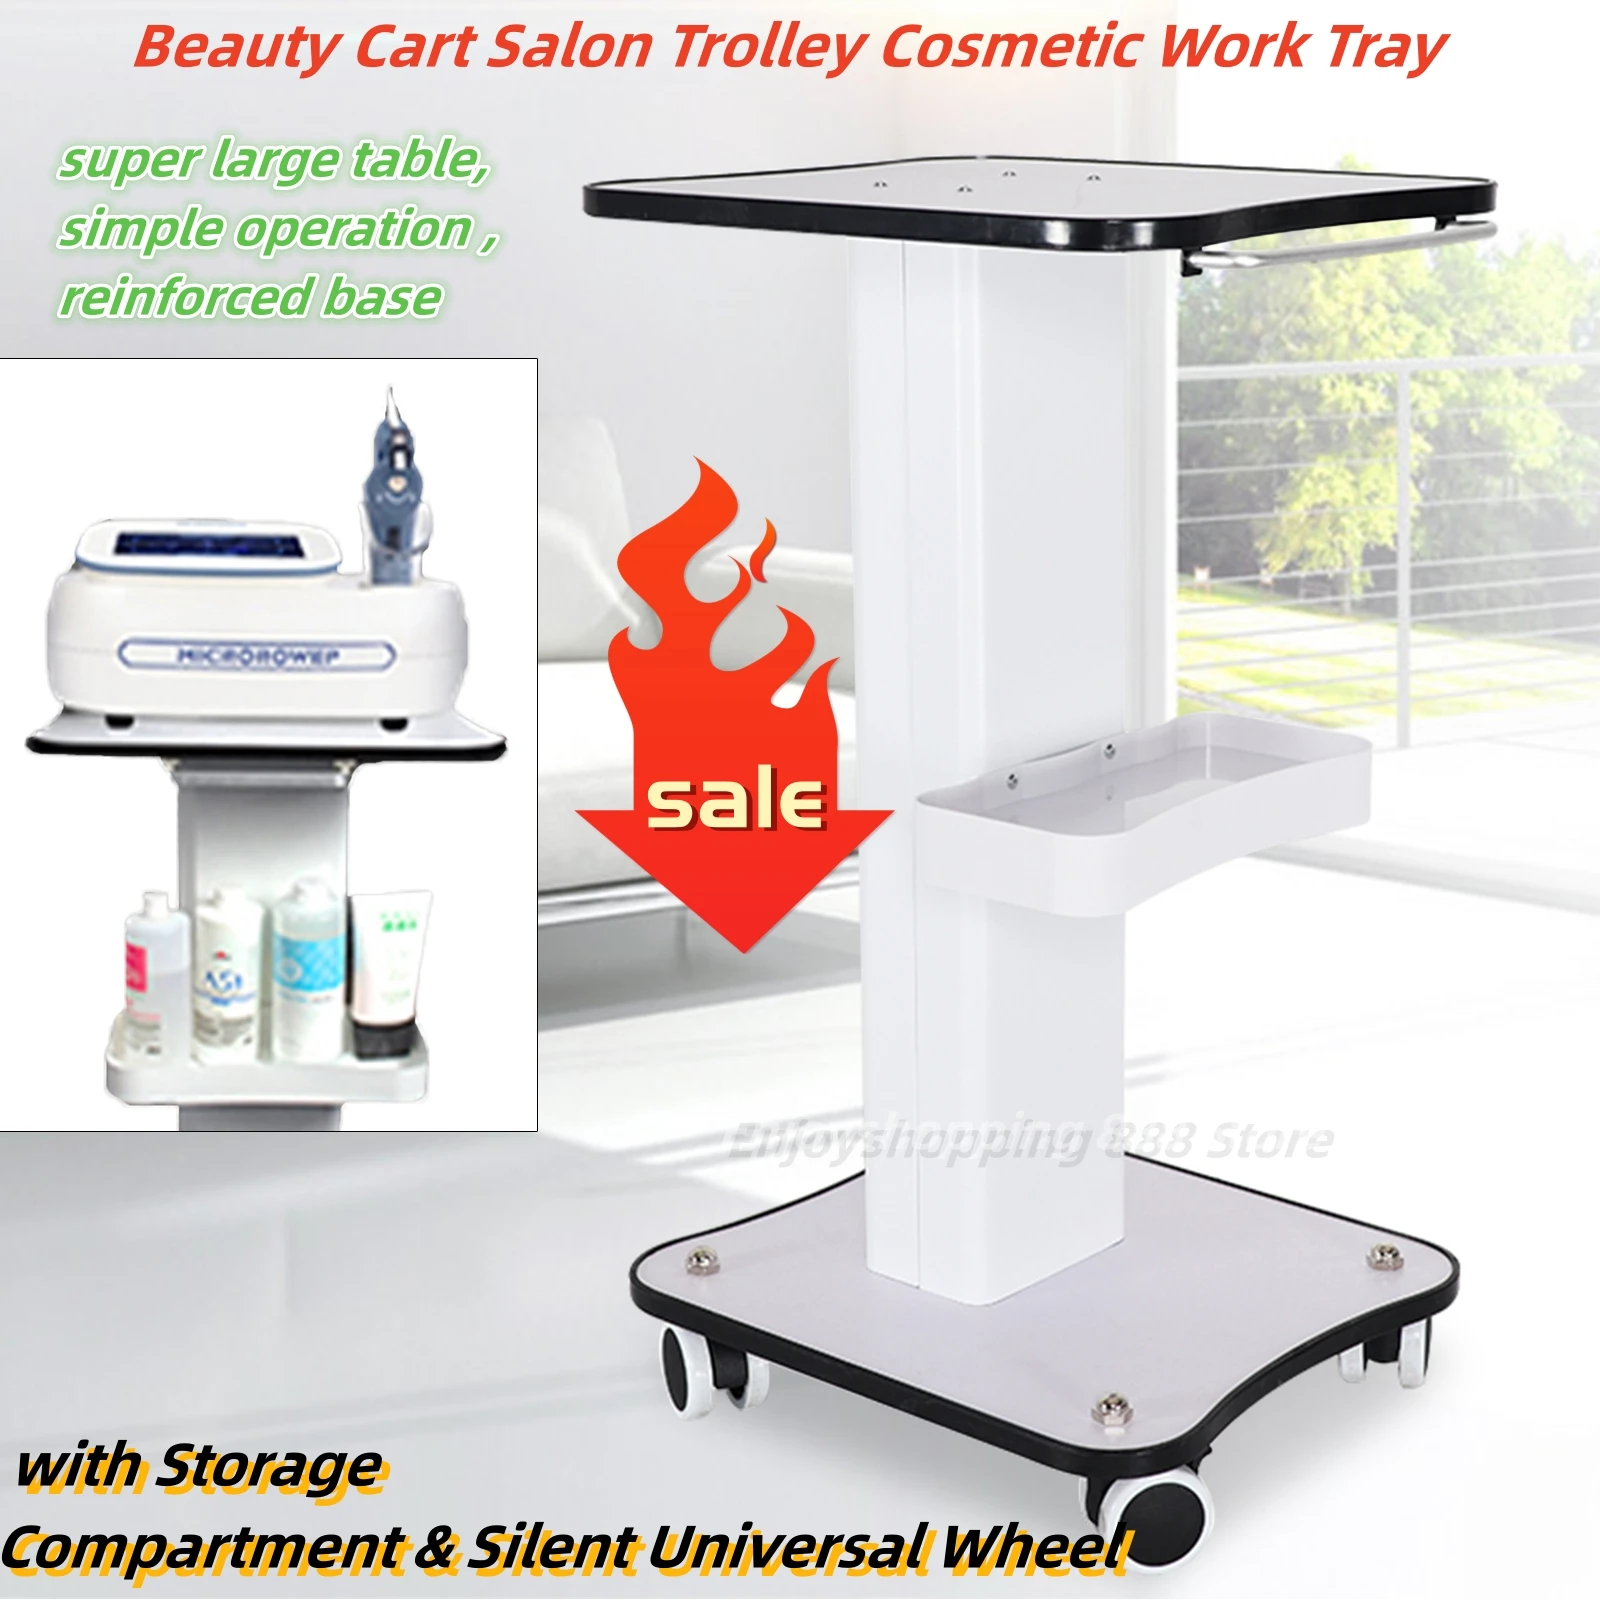 Beauty Cart Salon Trolley Cosmetic Work Tray with Storage Compartment & Silent Universal Wheel 1 pc 4 inch pvc universal wheel flat bottom industrial caster cart freezer trolley cross border manufacturer supply